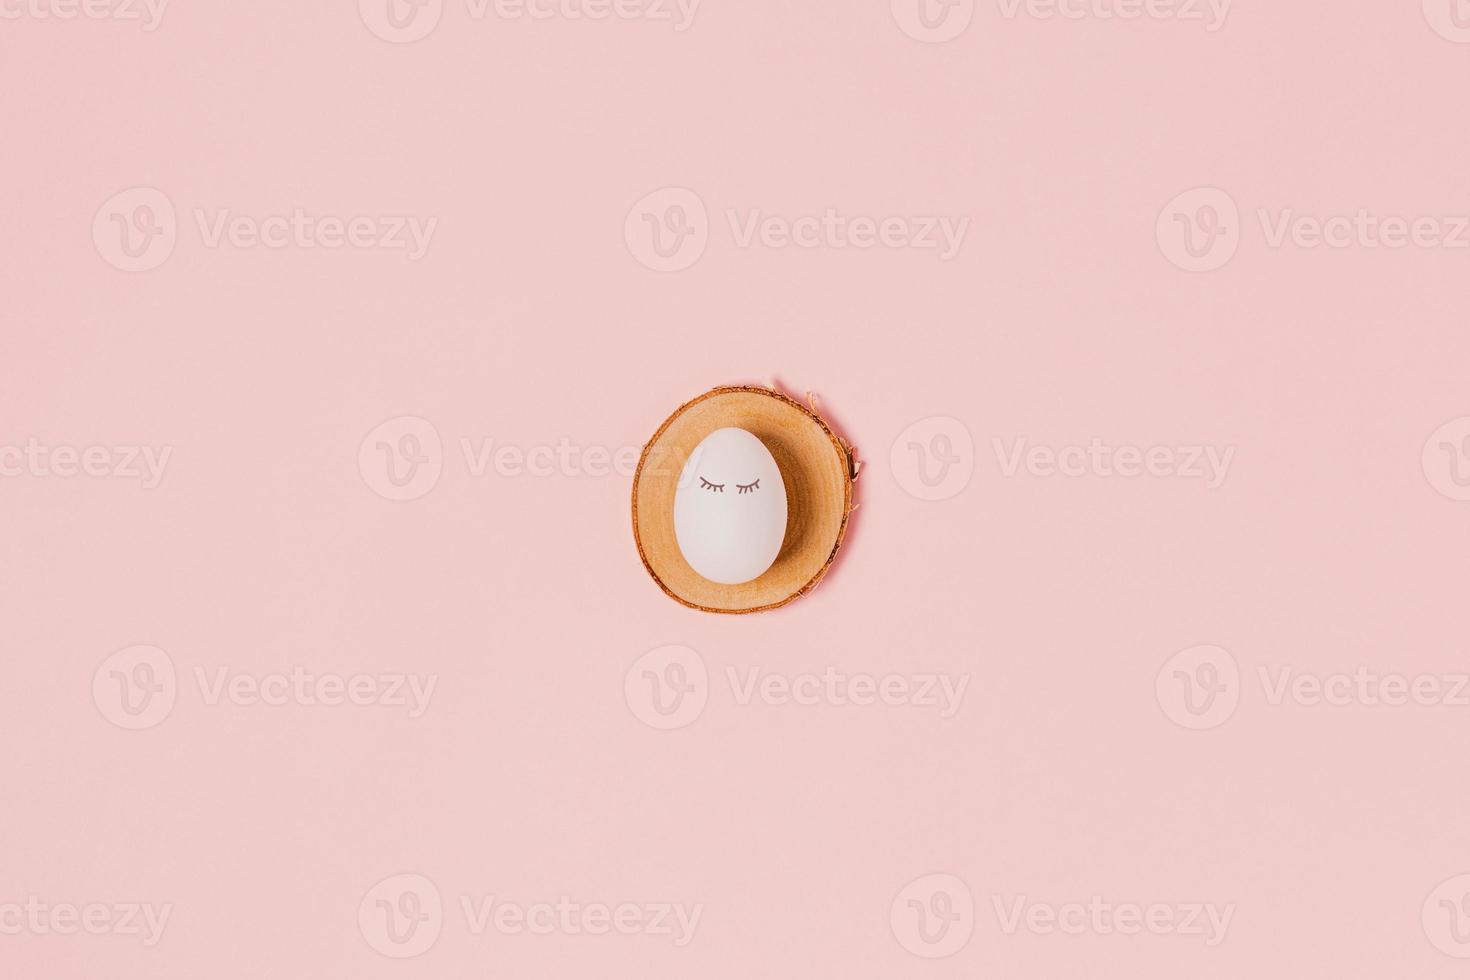 Egg on a pink background. photo